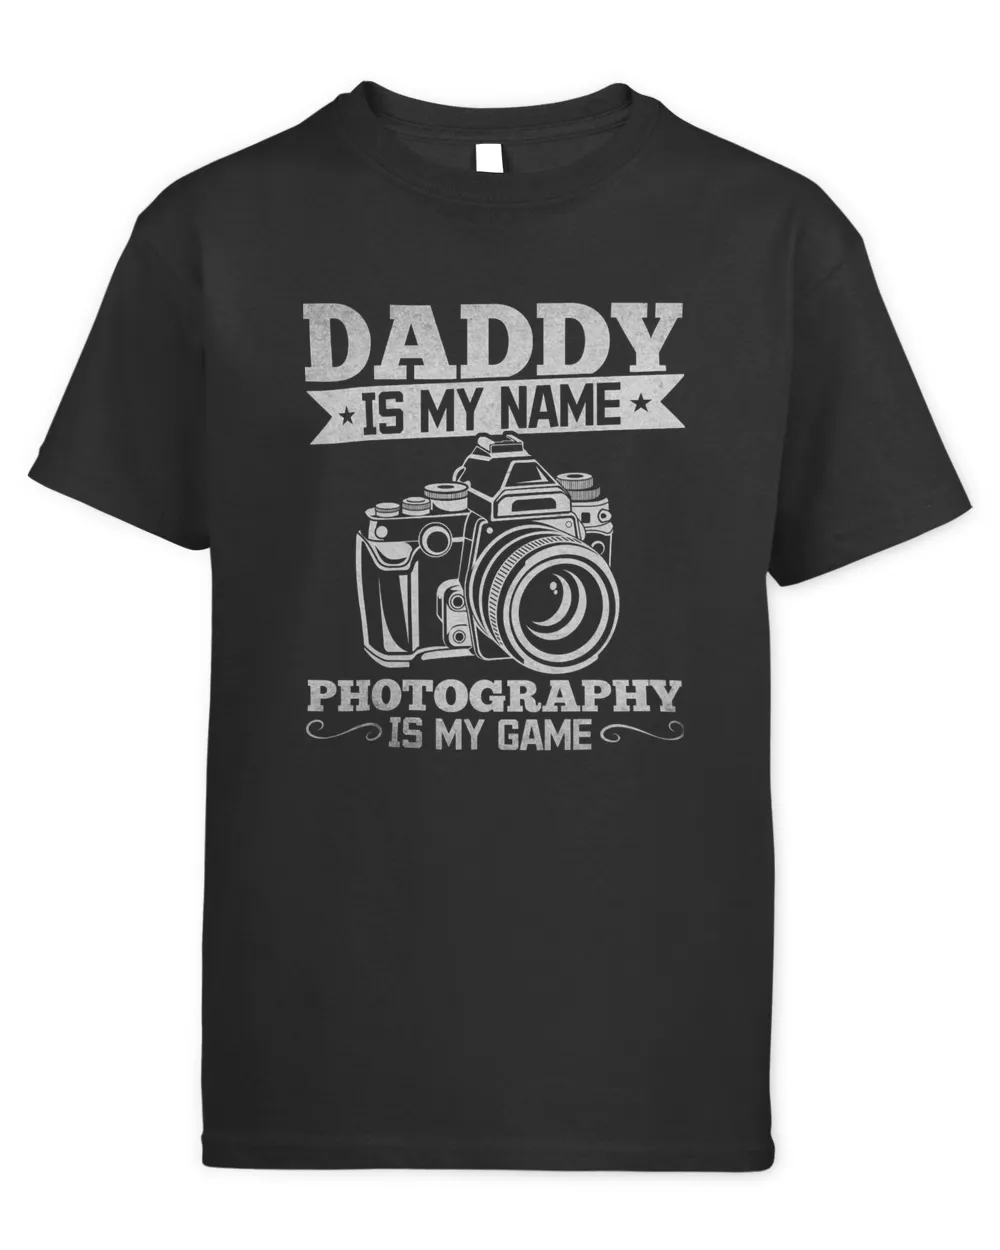 Mens Photographer Daddy Is My Name Photography Is My Game